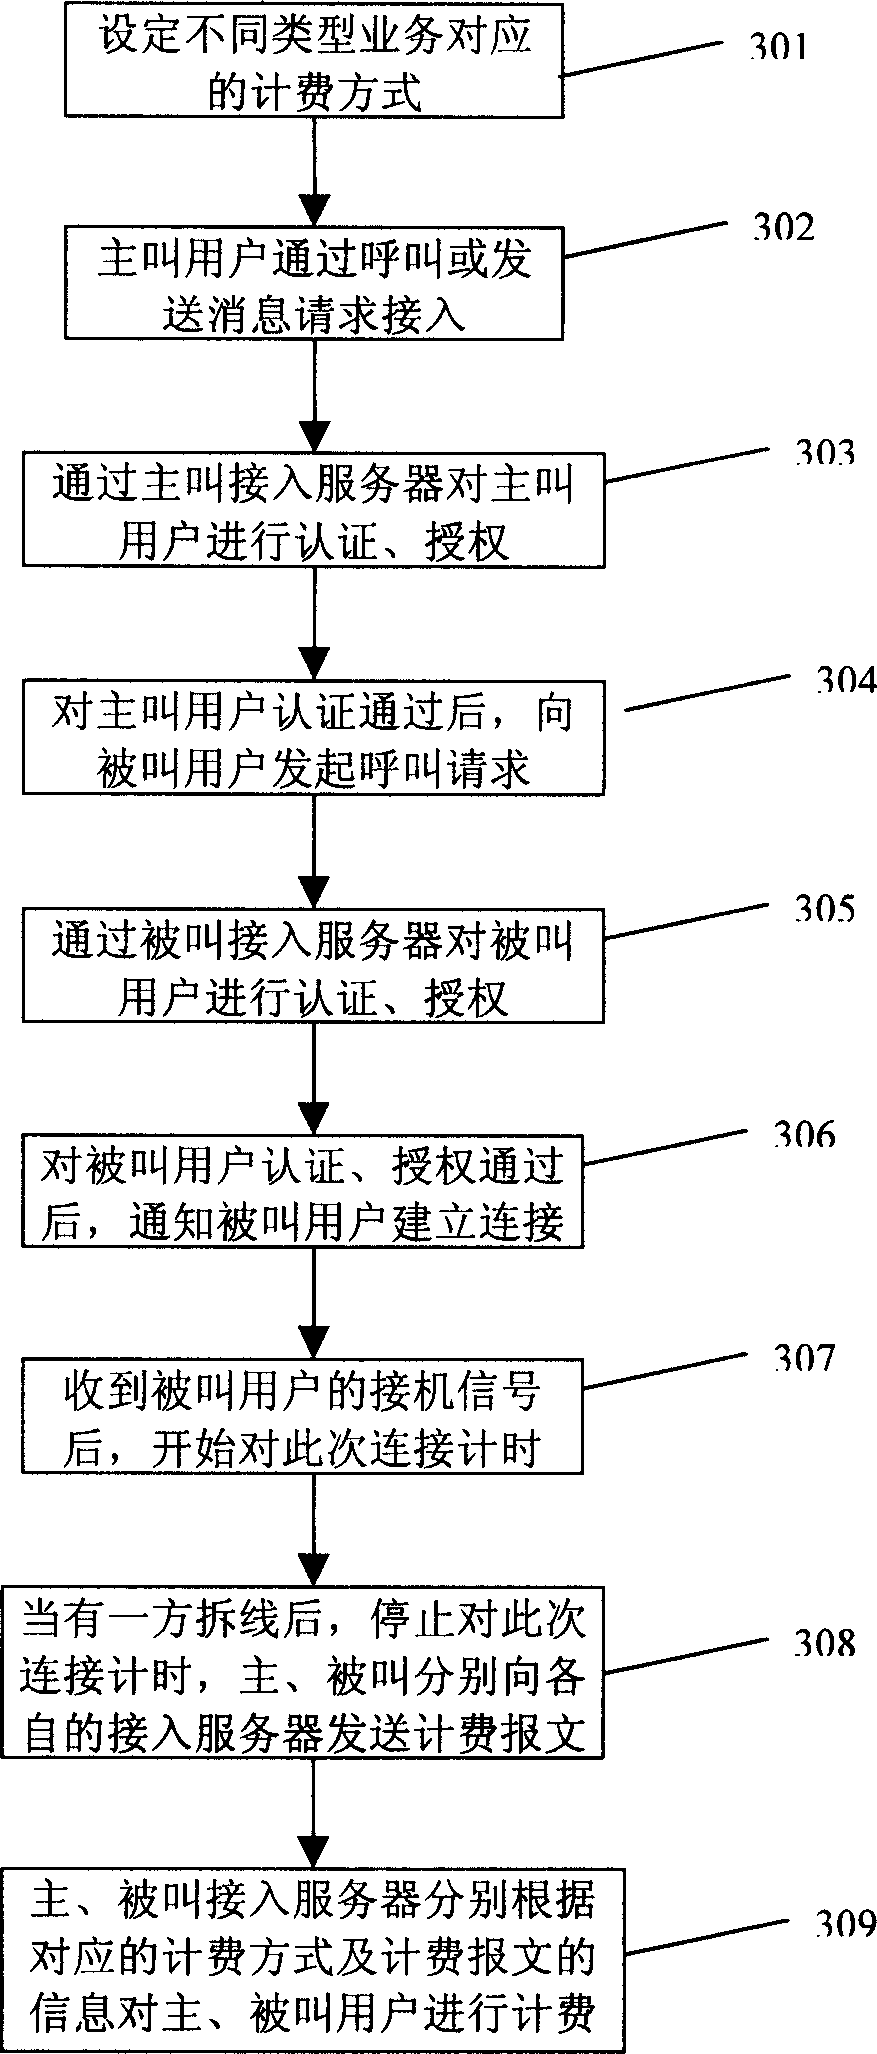 Authentication charging method for personal virtual number business